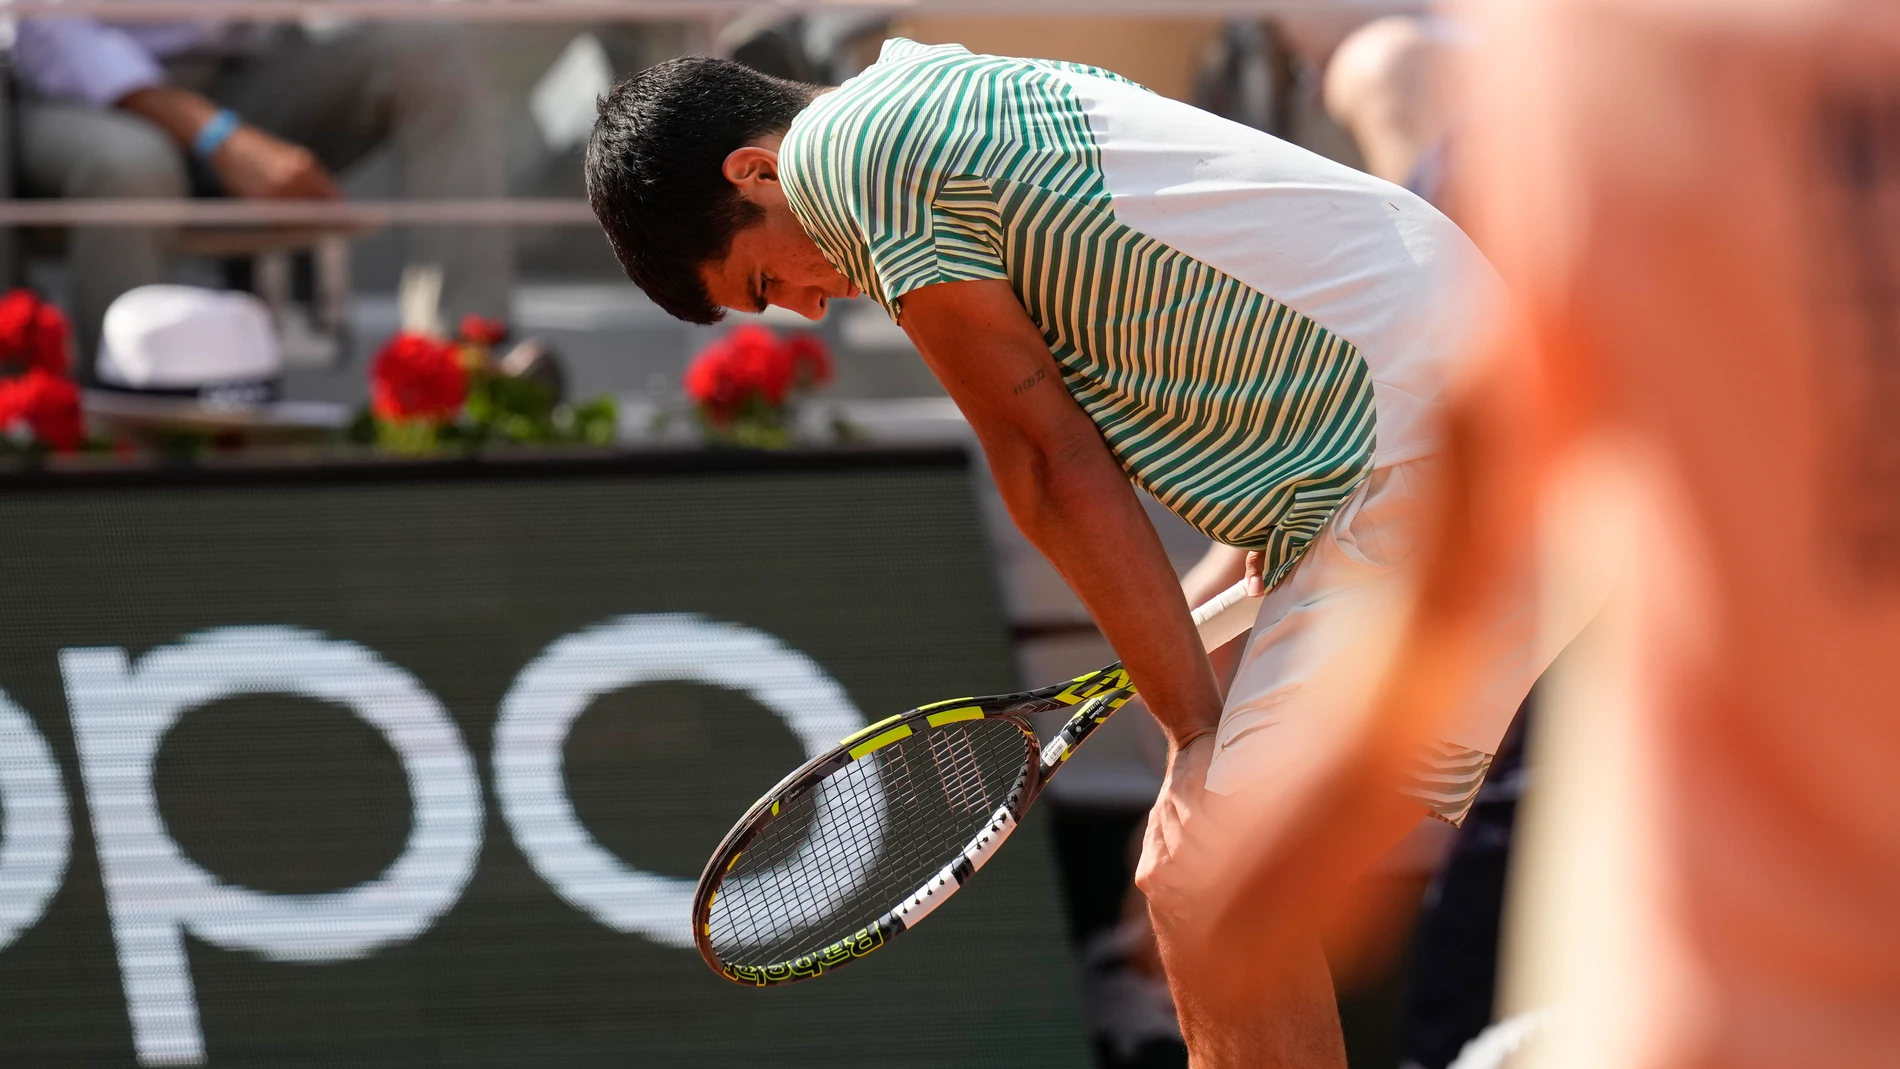 Spain's Carlos Alcaraz suffers form leg cramps during the semifinal match of the French Open tennis tournament against Serbia's Novak Djokovic at the Roland Garros stadium in Paris, Friday, June 9, 2023. (AP Photo/Christophe Ena)